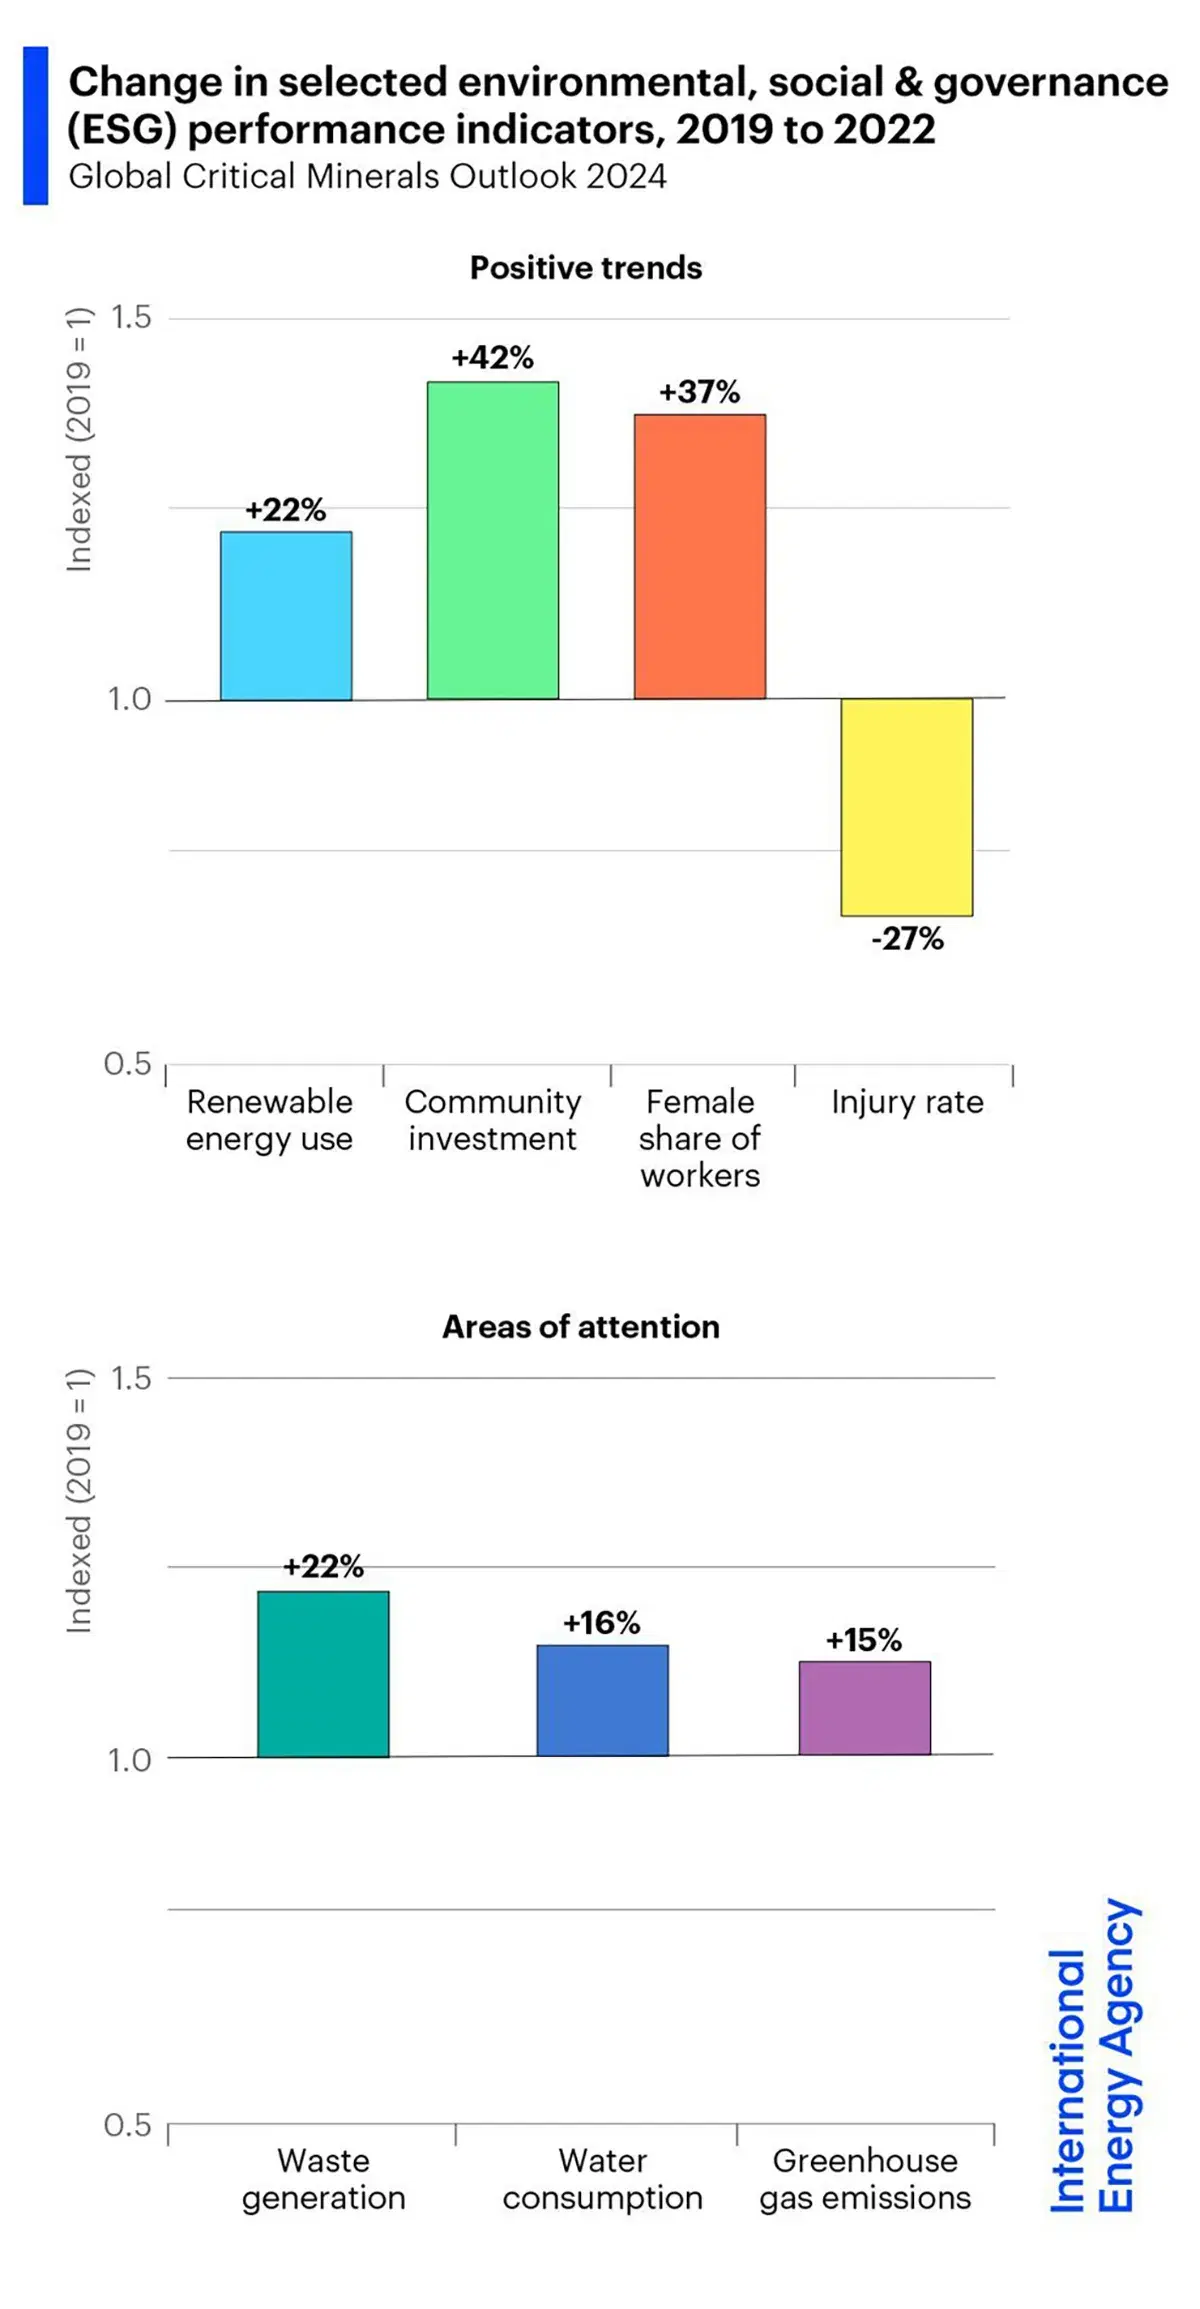 Change in ESG Performance Indicators in the Critical Minerals Industry